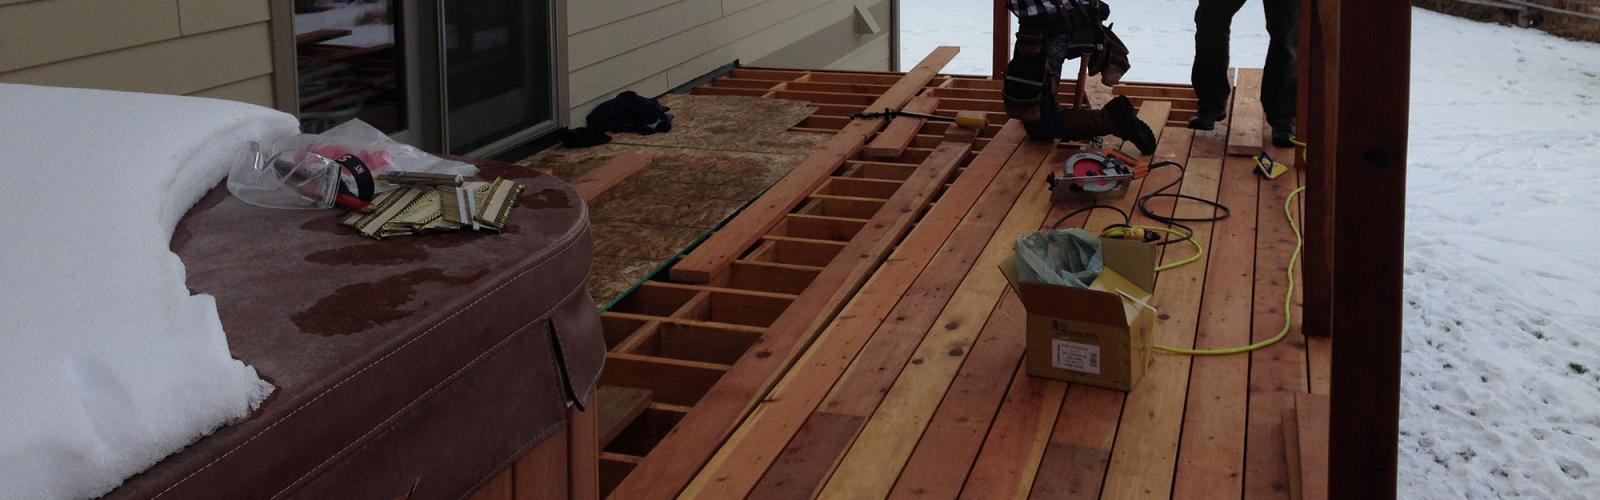 decking and railing installation